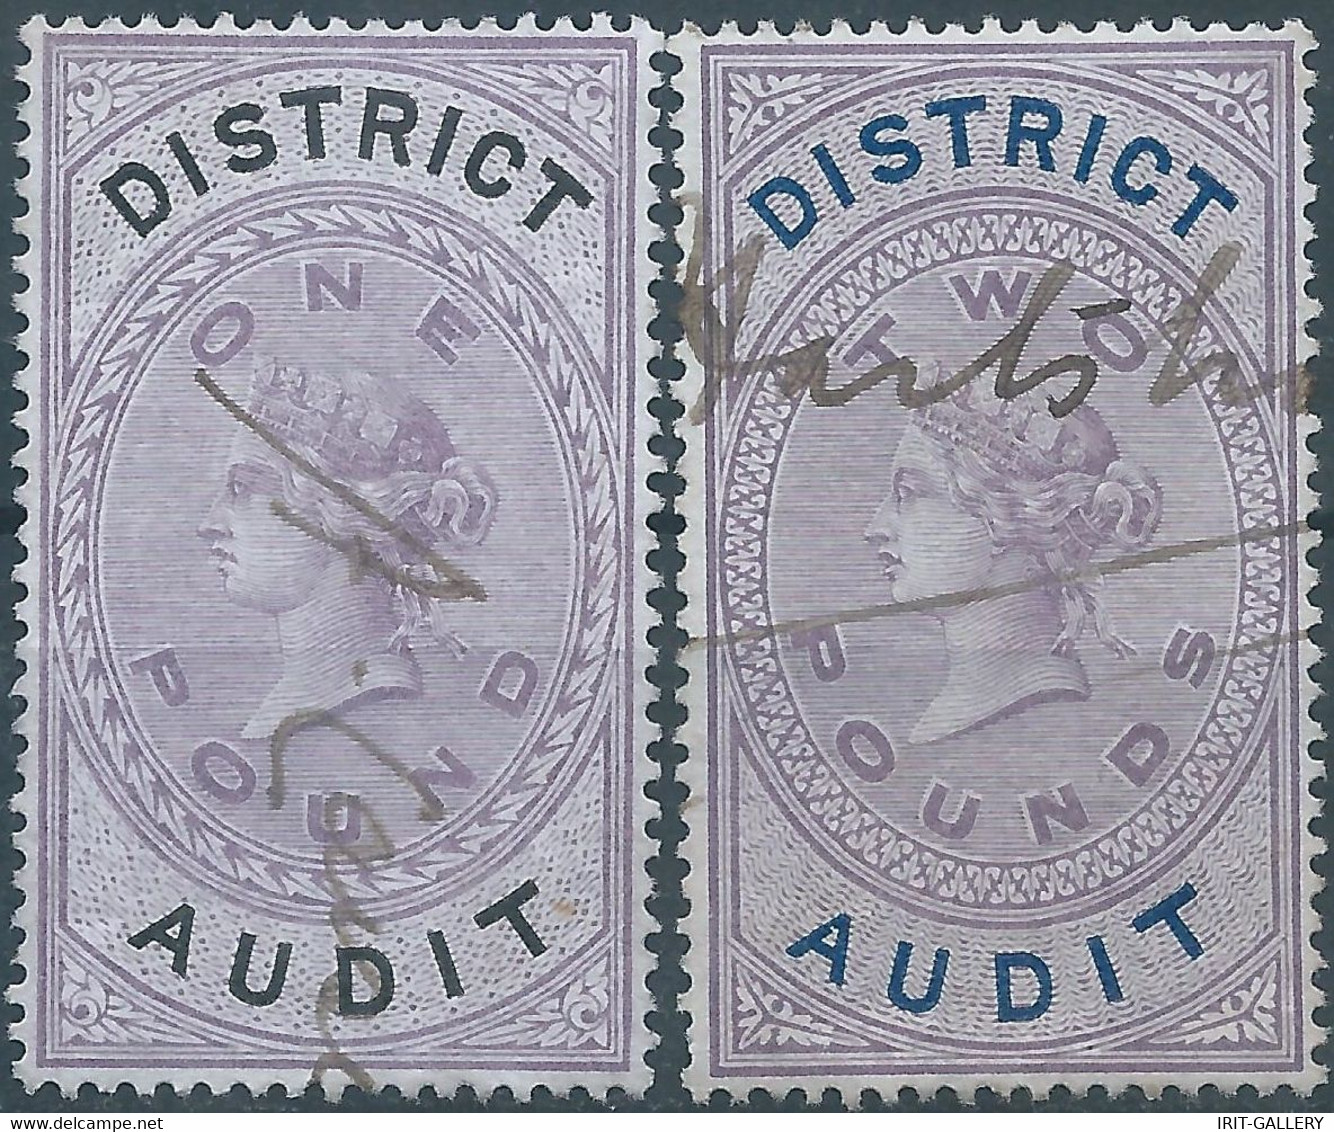 Great Britain-ENGLAND,Queen Victoria,1880-1900 Revenue Stamp Tax Fisca DISTRICT AUDIT,1&2 Pounds,Uset - Fiscaux